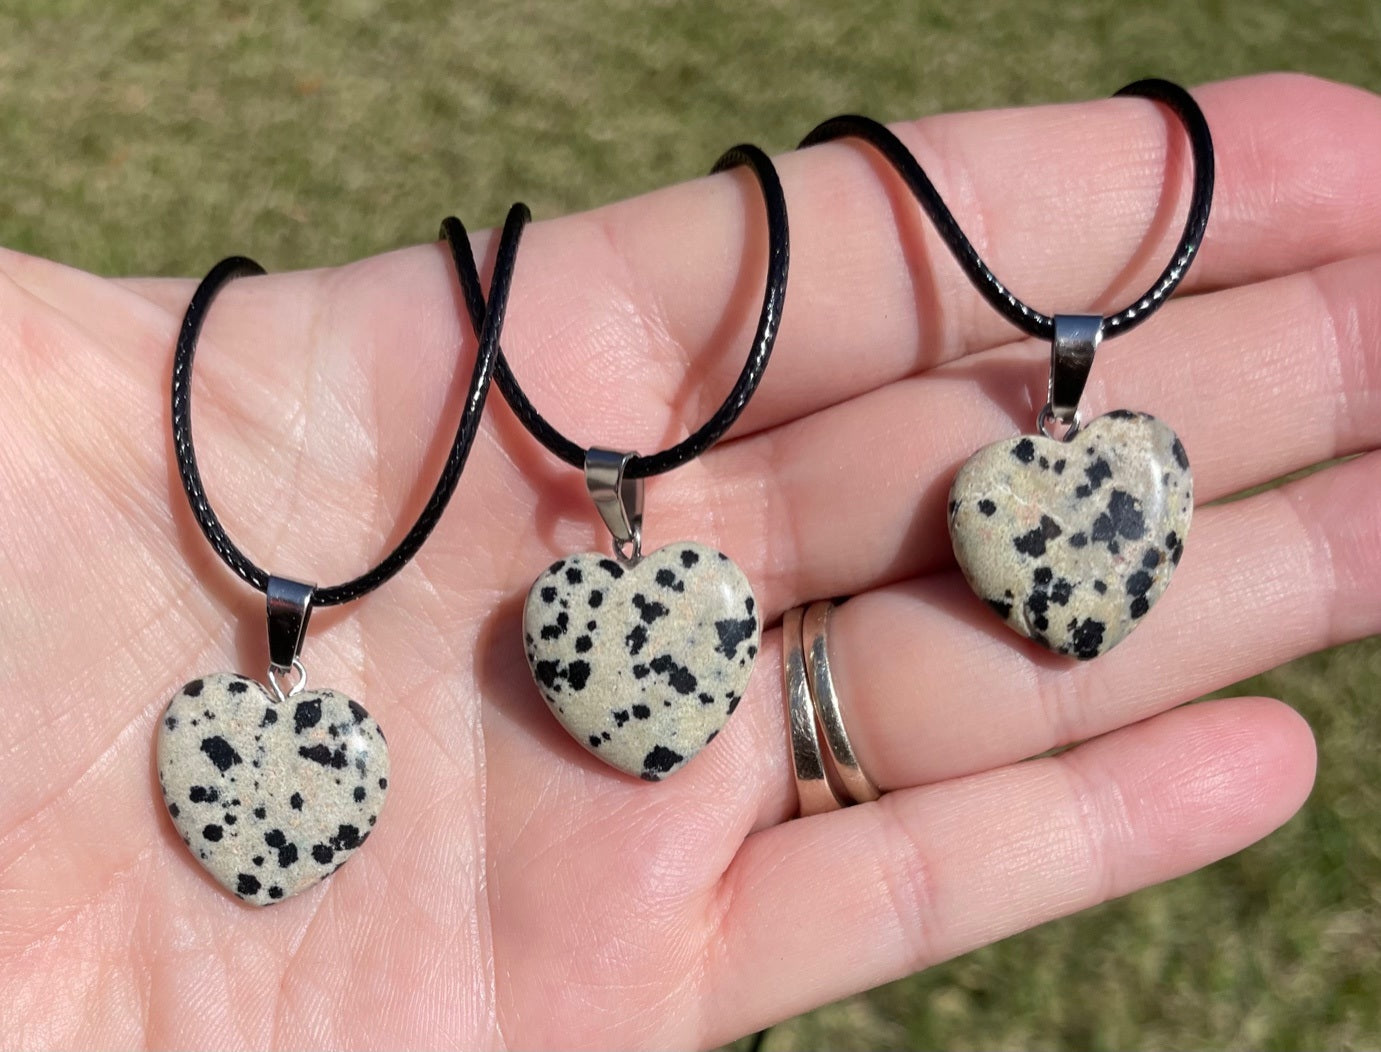 Dalmatian Jasper Crystal Heart Necklace With Cord Chain